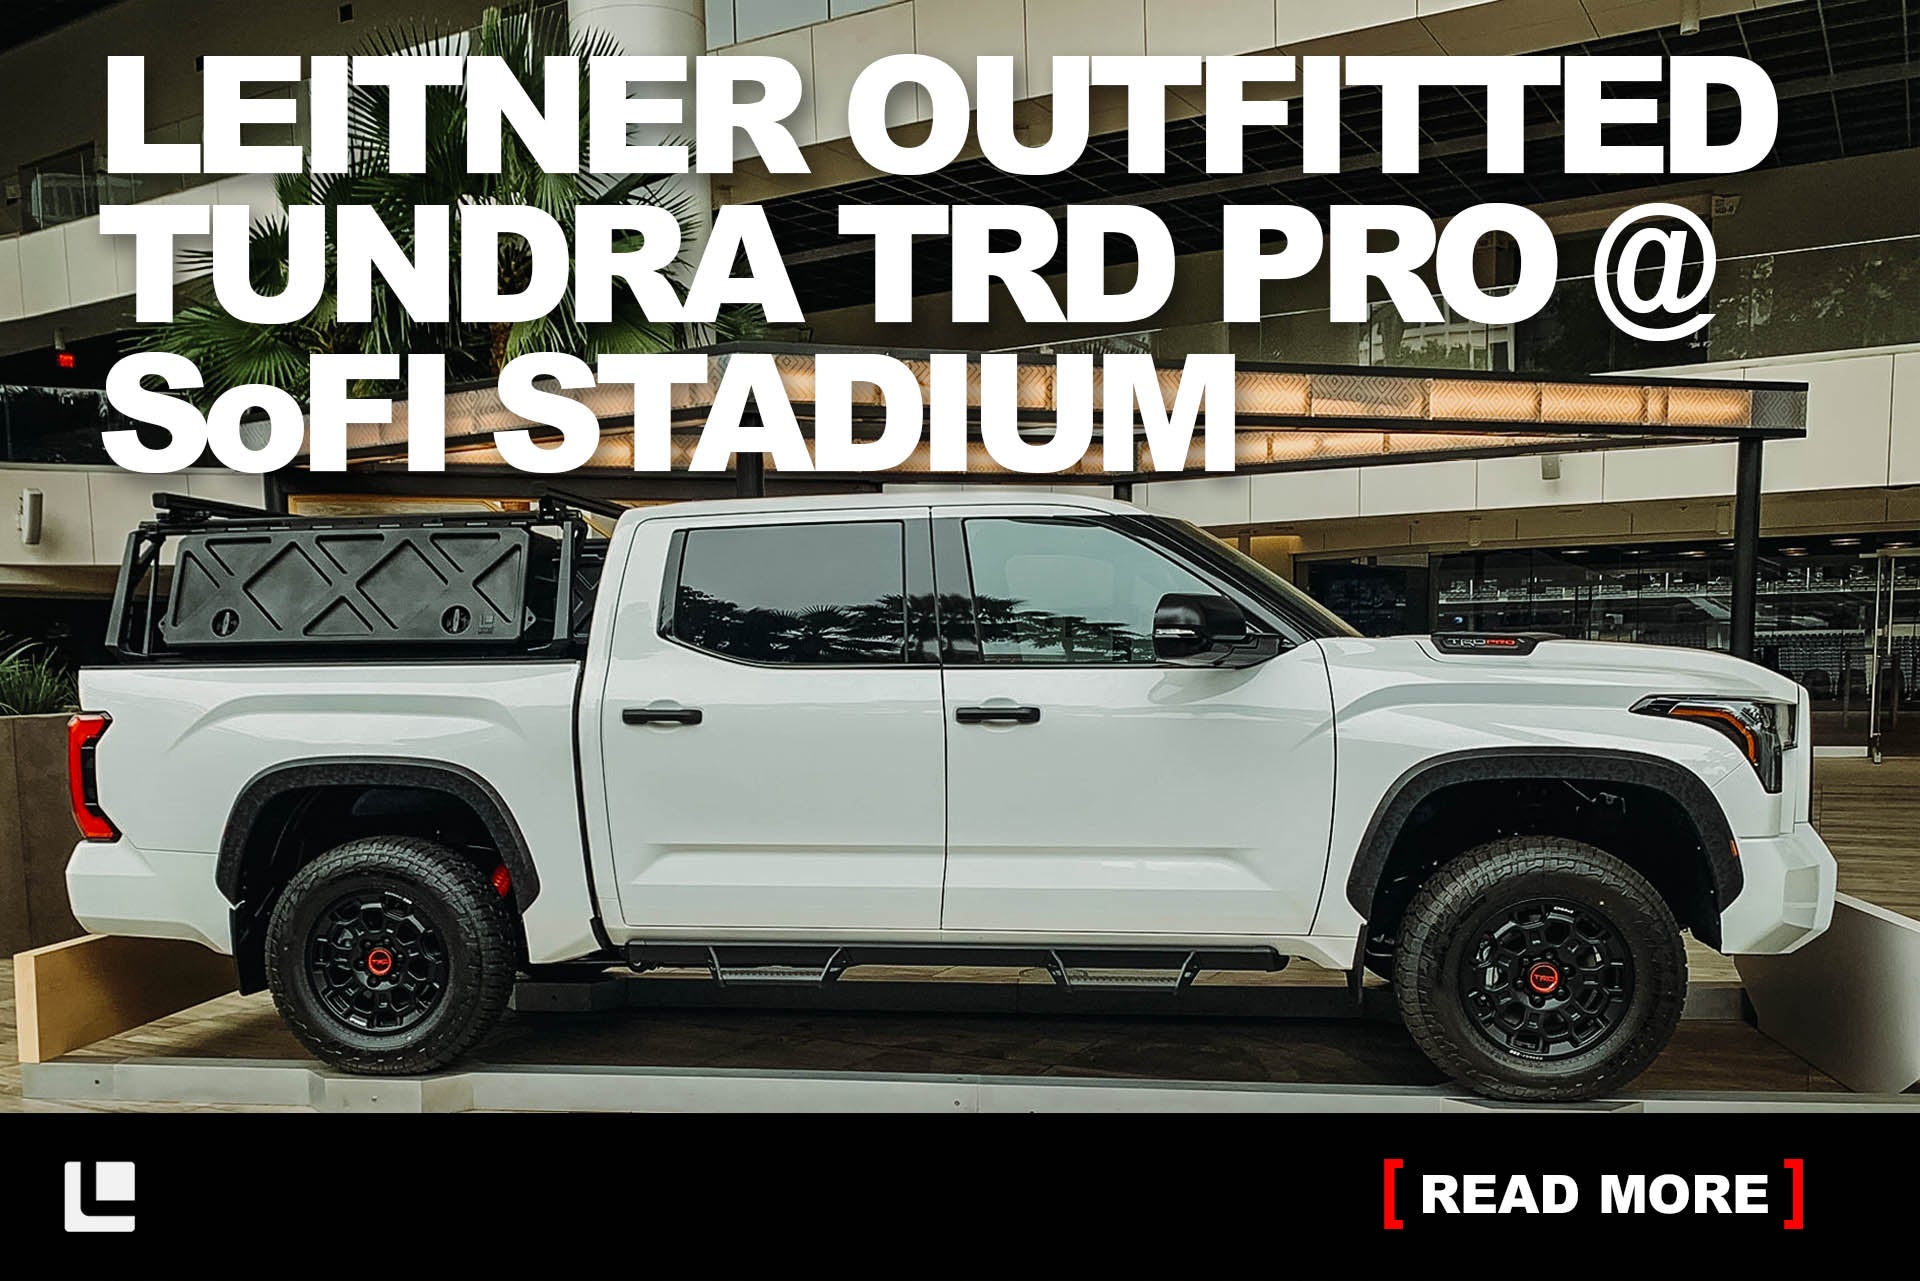 Leitner-Outfitted Toyota Tundra TRD Pro gets VIP treatment at SoFi Stadium